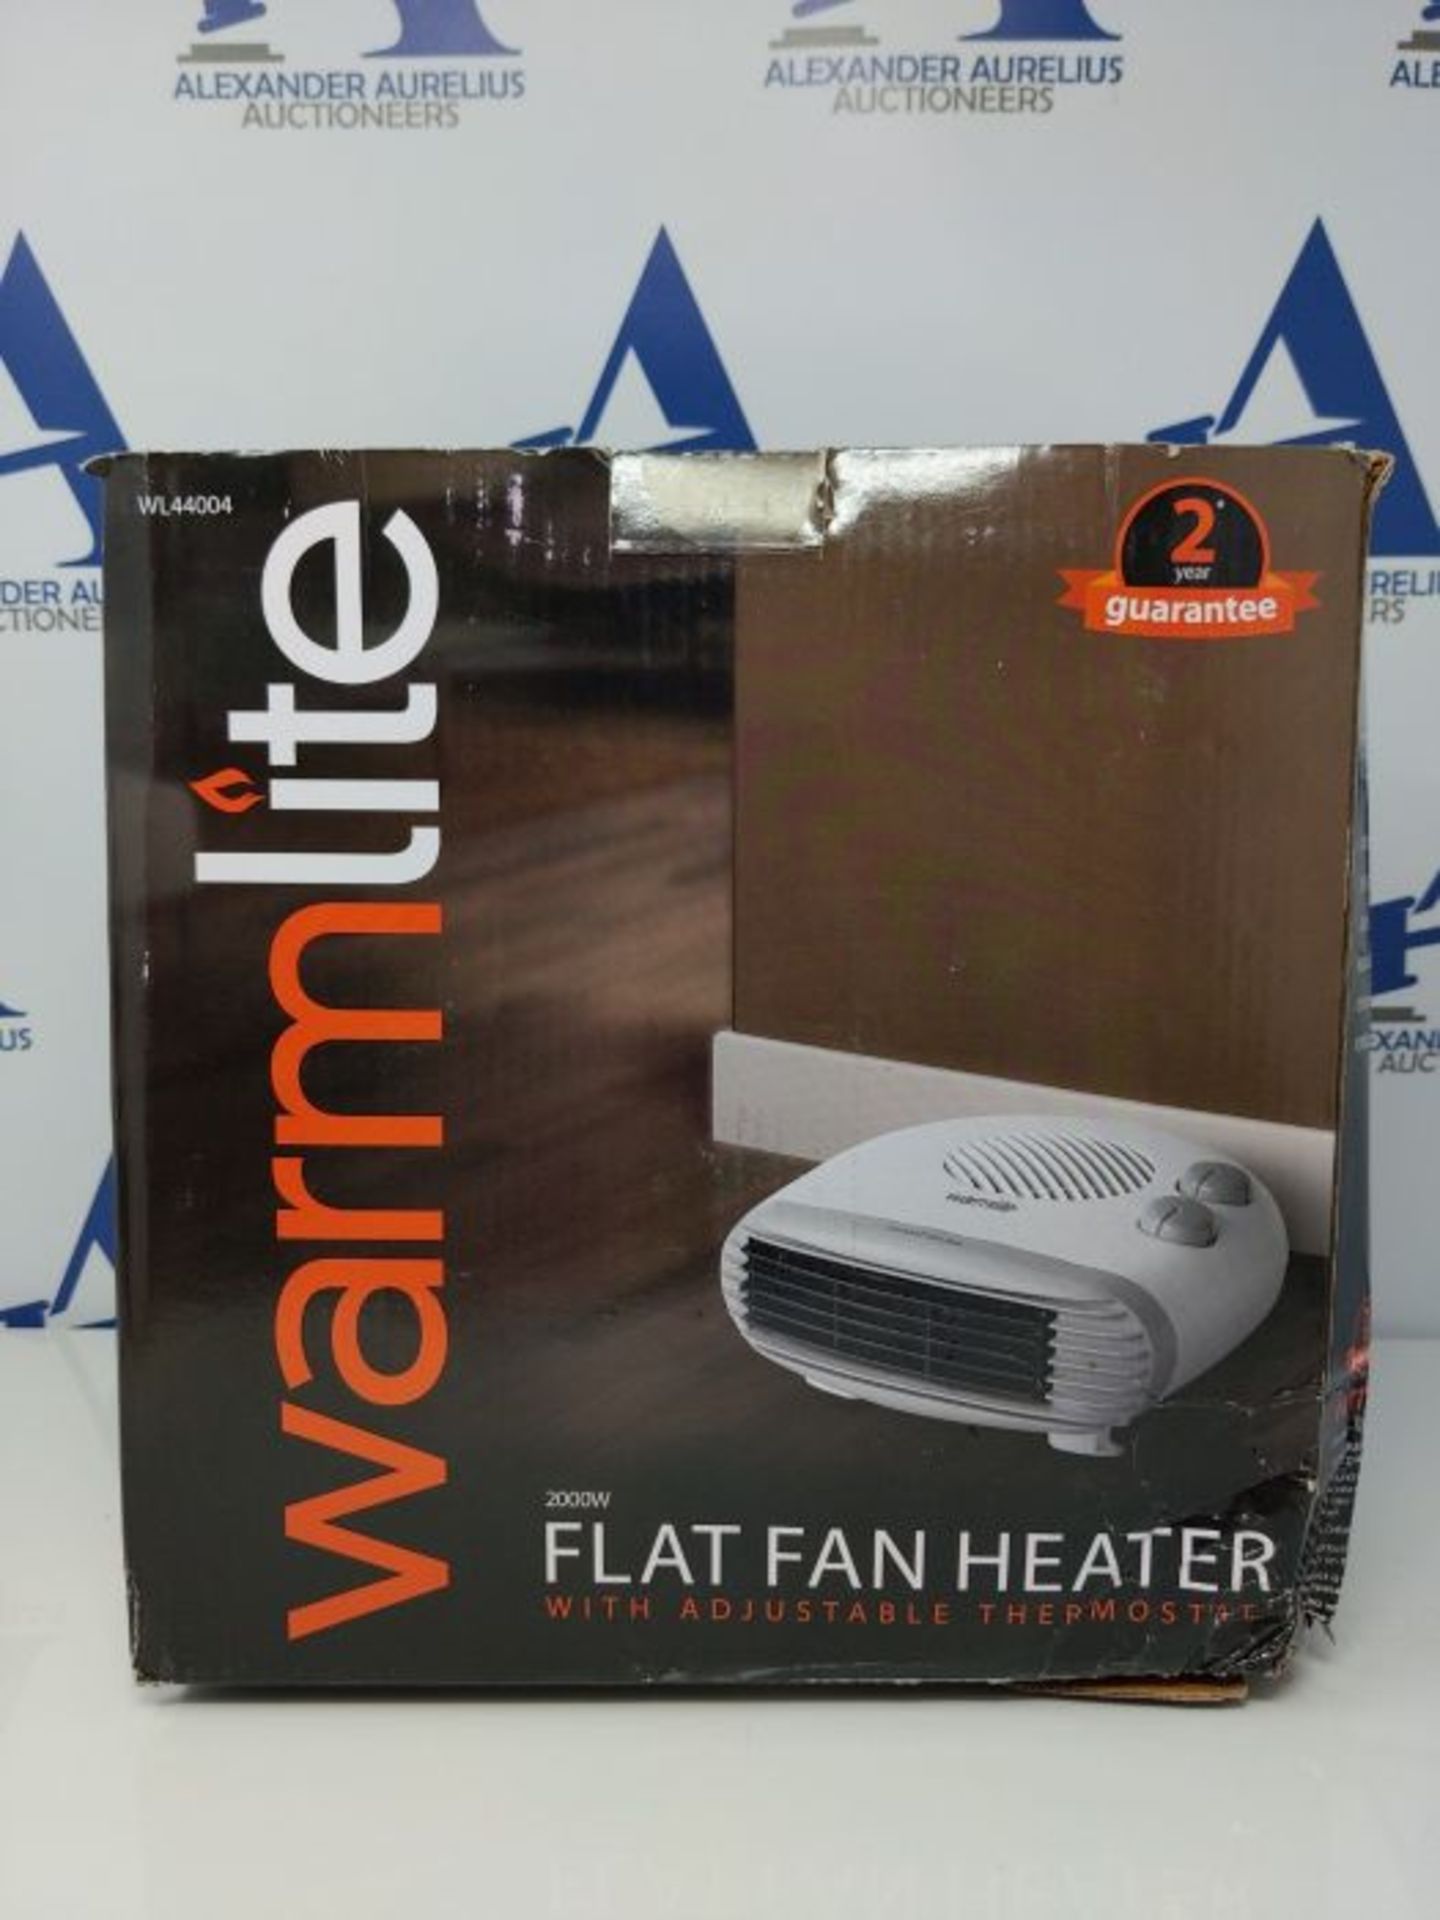 Warmlite WL44004 2000W Portable Flat Fan Heater with 2 Heat Settings and Overheat Prot - Image 2 of 3